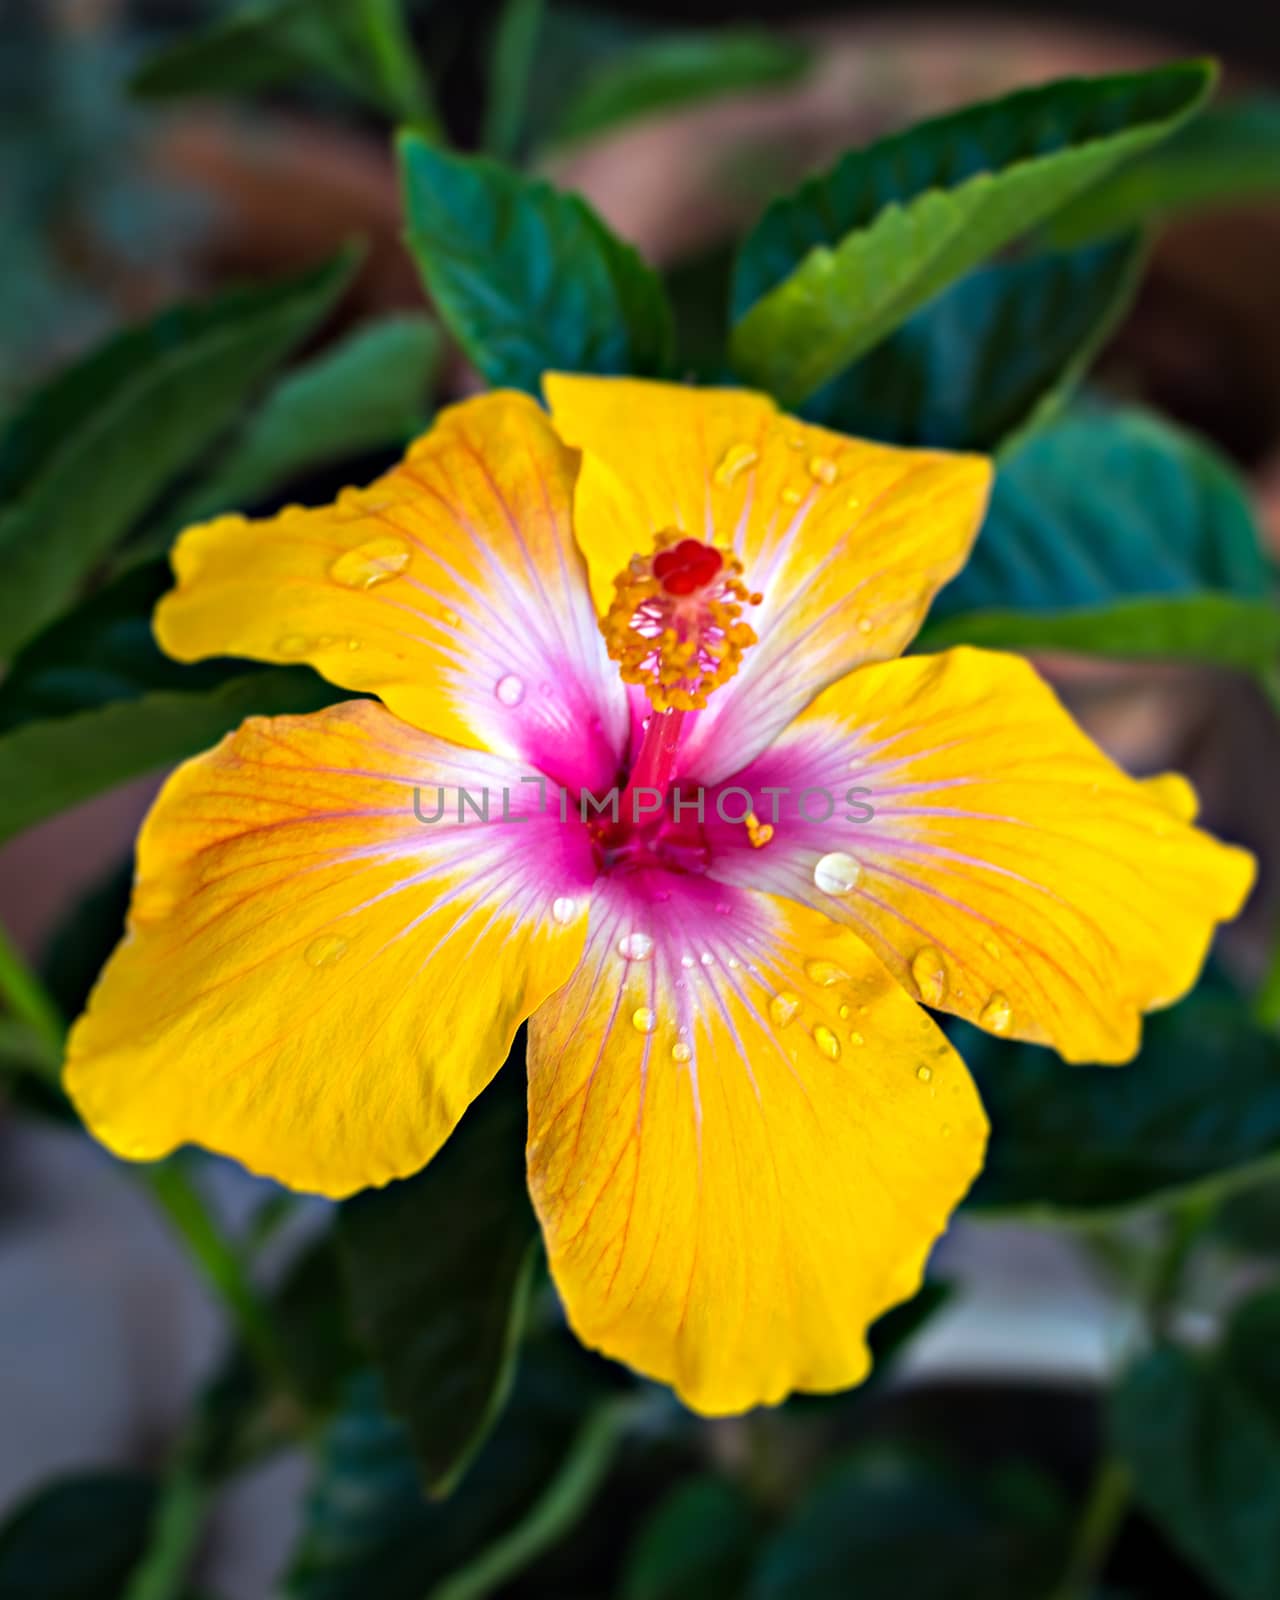 Isolated, close-up image of yellow & pink petals of Hibiscus flower with yellow center. by lalam